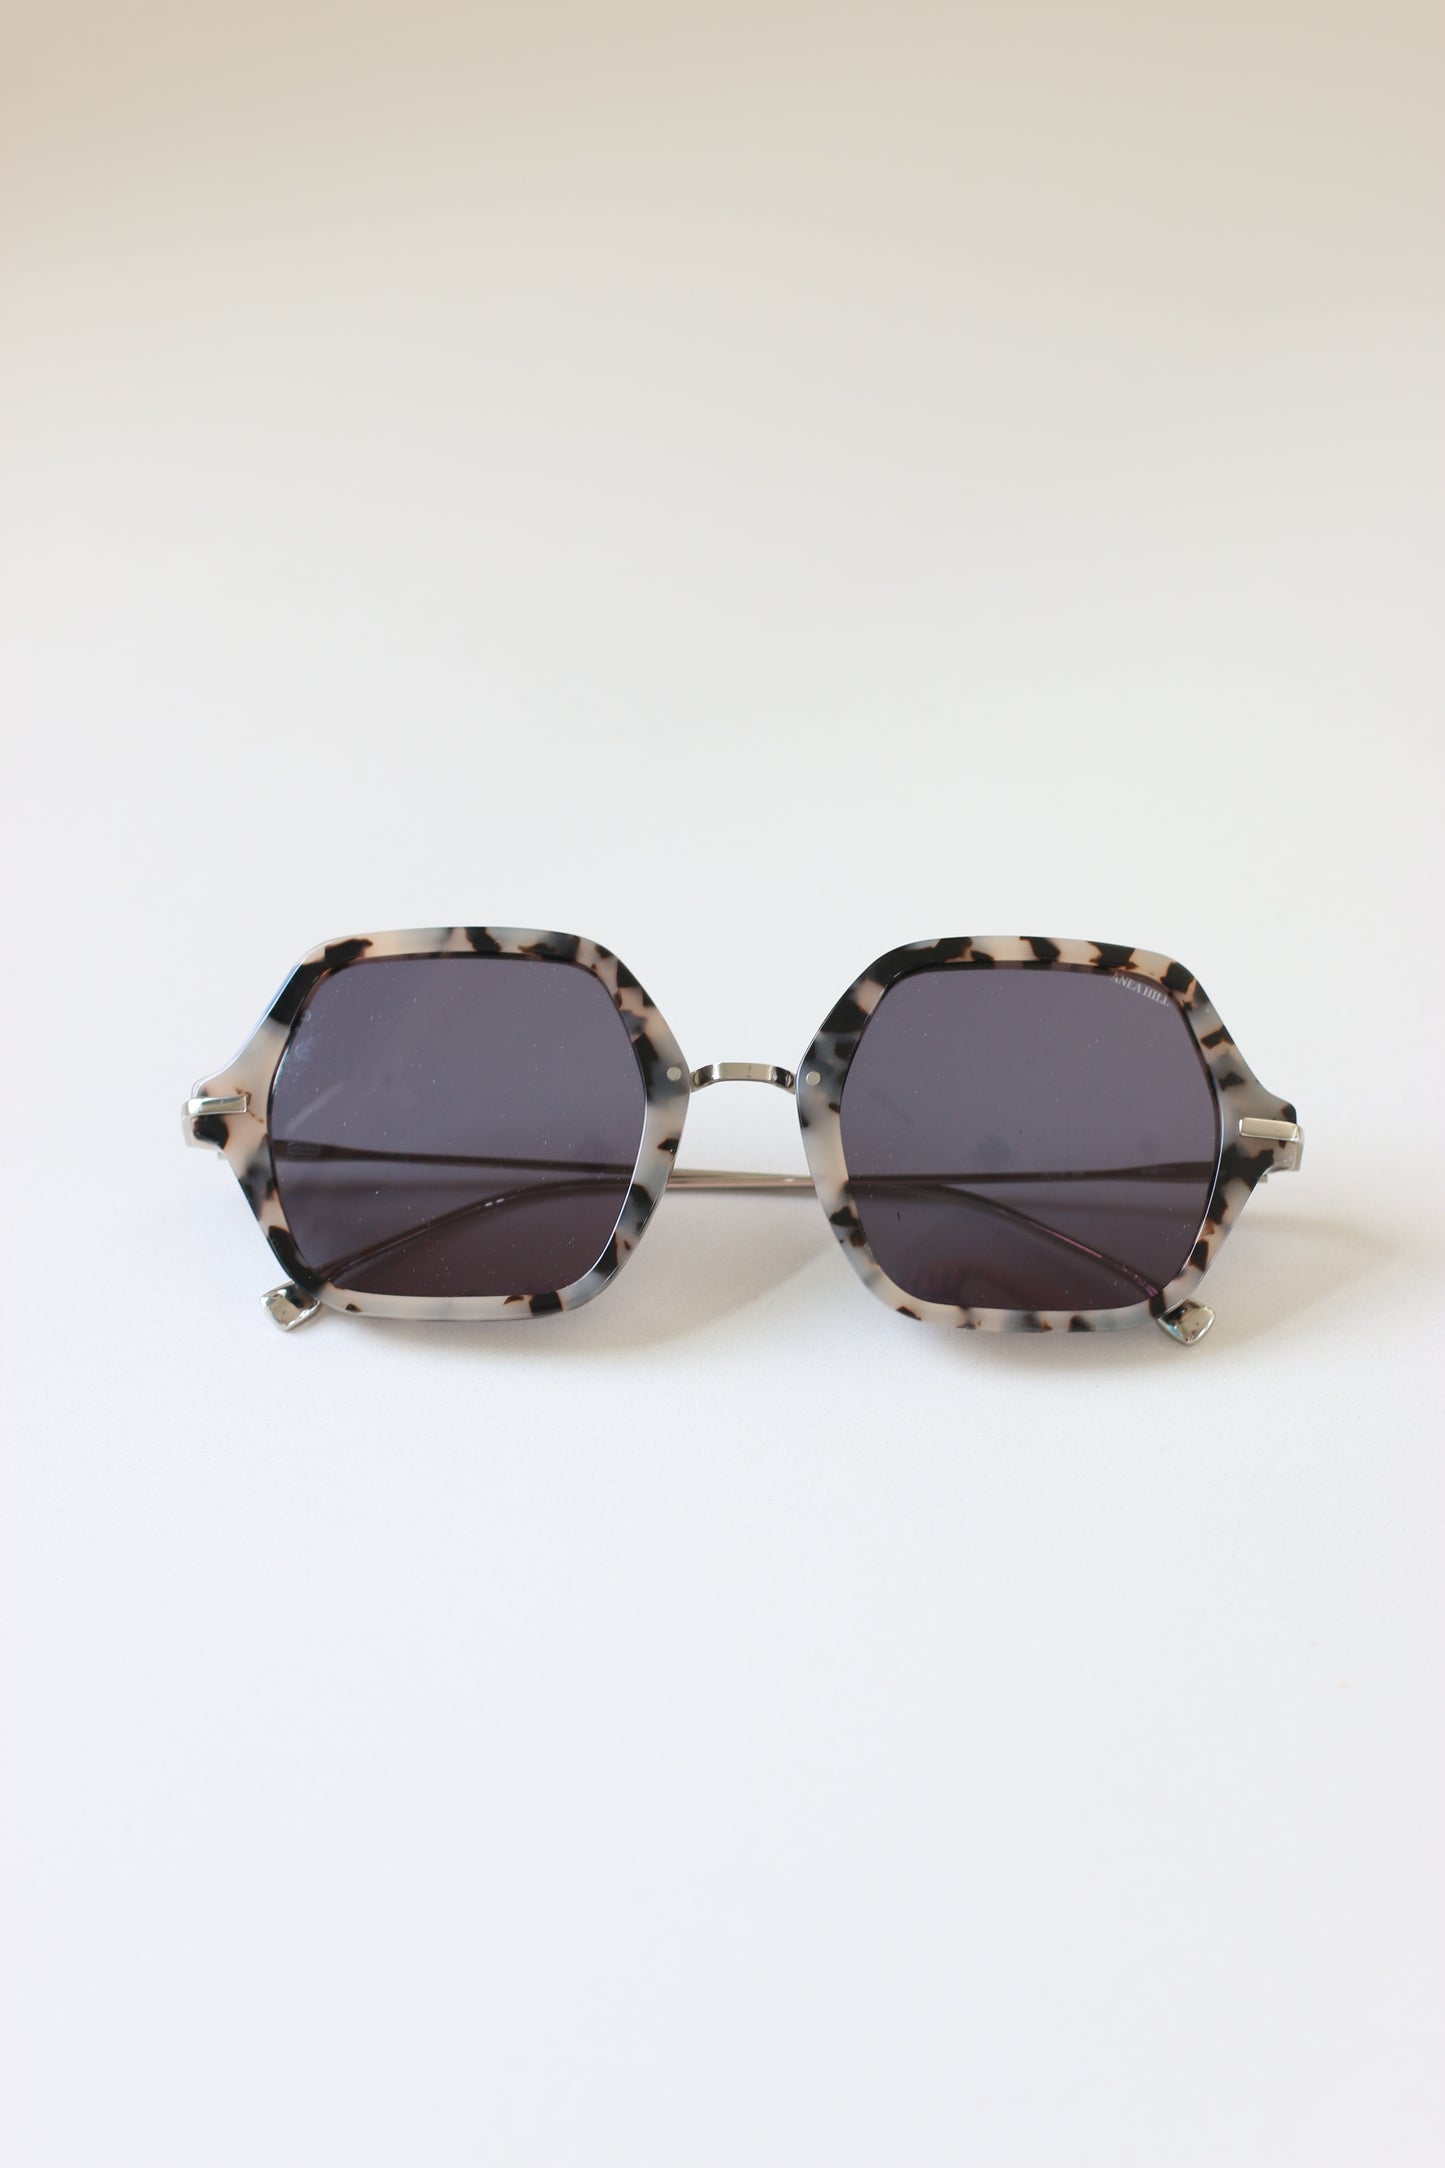 ANEAHILL's in-house designed women sunglasses are a must-have accessory for those who want to look and feel their best.